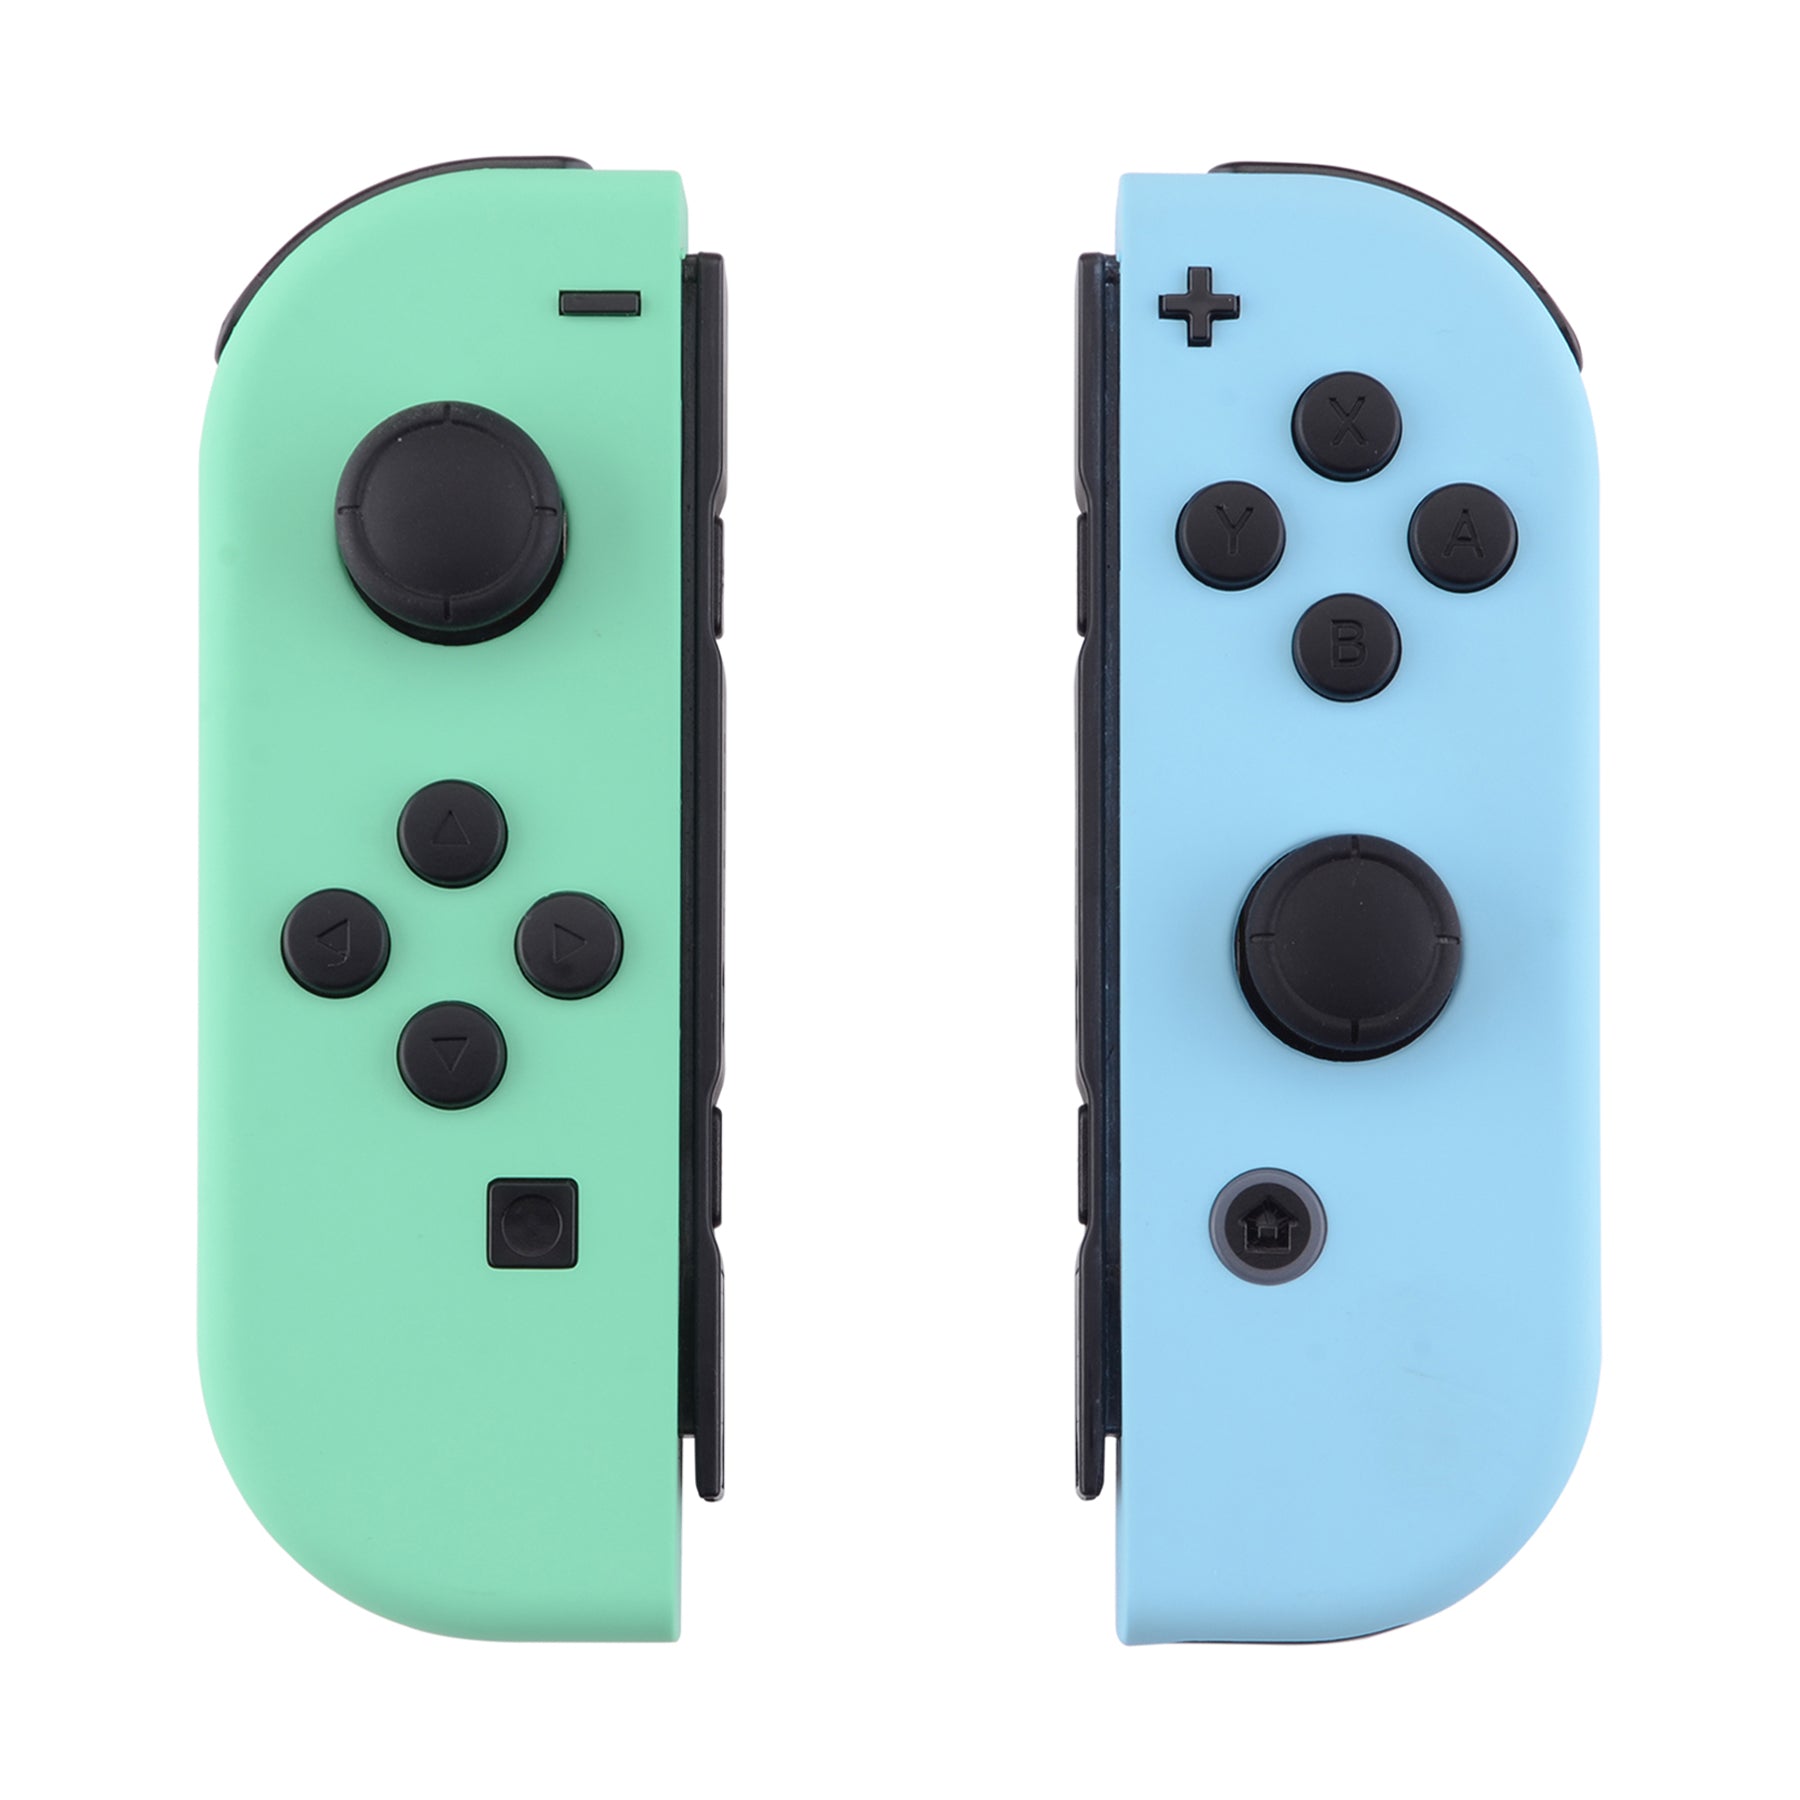 eXtremeRate Replacement Full Set Shell Case with Buttons for Joycon of NS Switch - Mint Green & Heaven Blue eXtremeRate